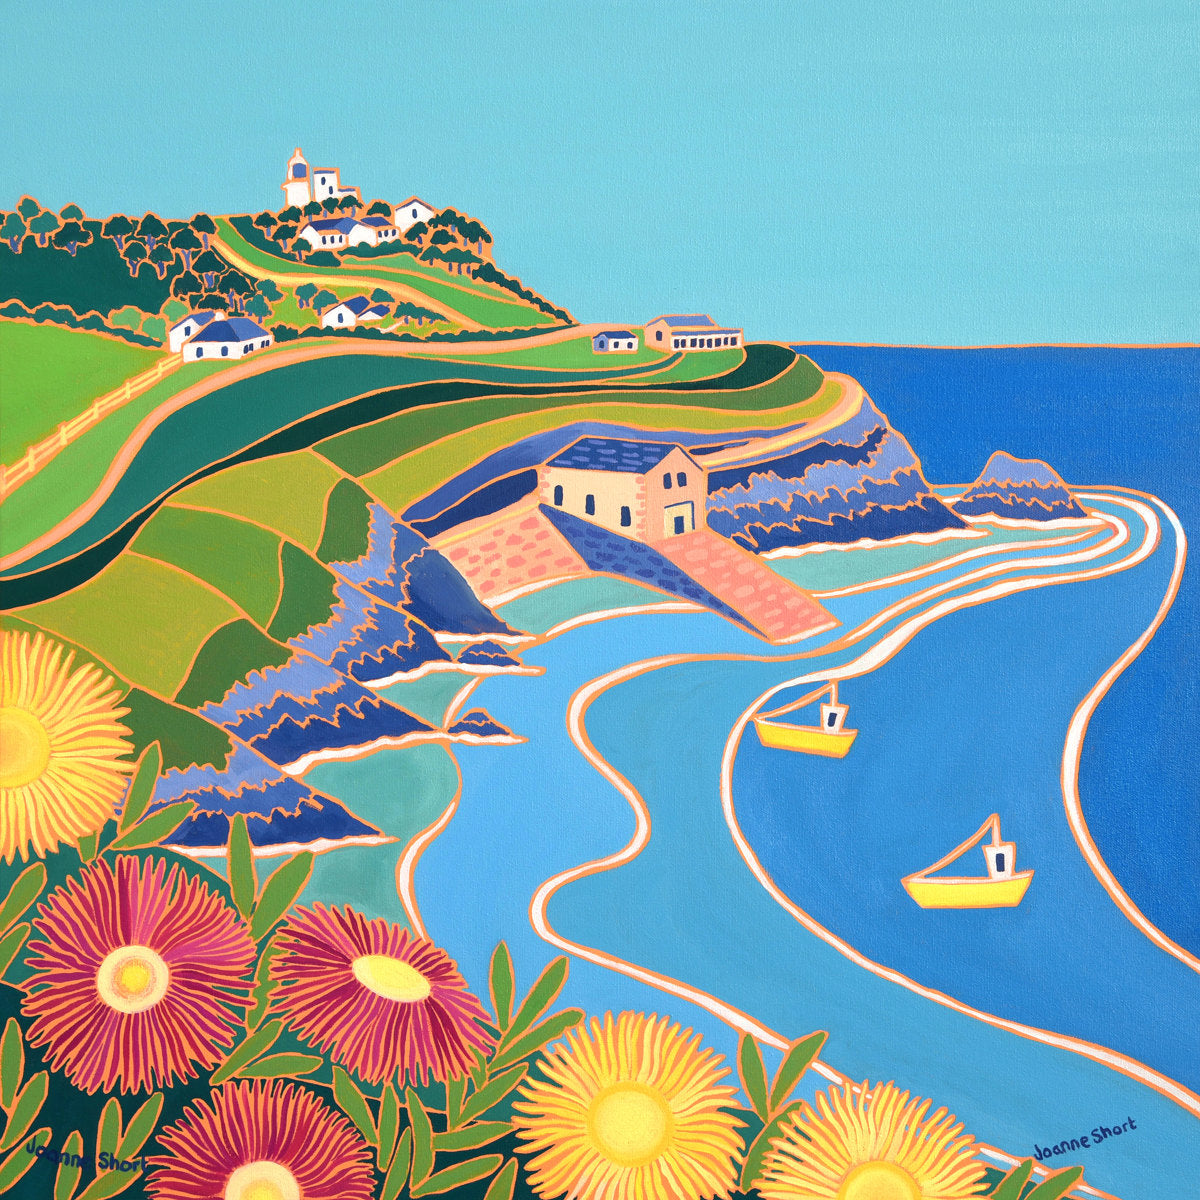 &#39;Hottentots on the Cliffs, Lizard Point’. 24x24 inches oil on canvas. Paintings of Cornwall by Cornish Artist Joanne Short from our Cornwall Art Gallery